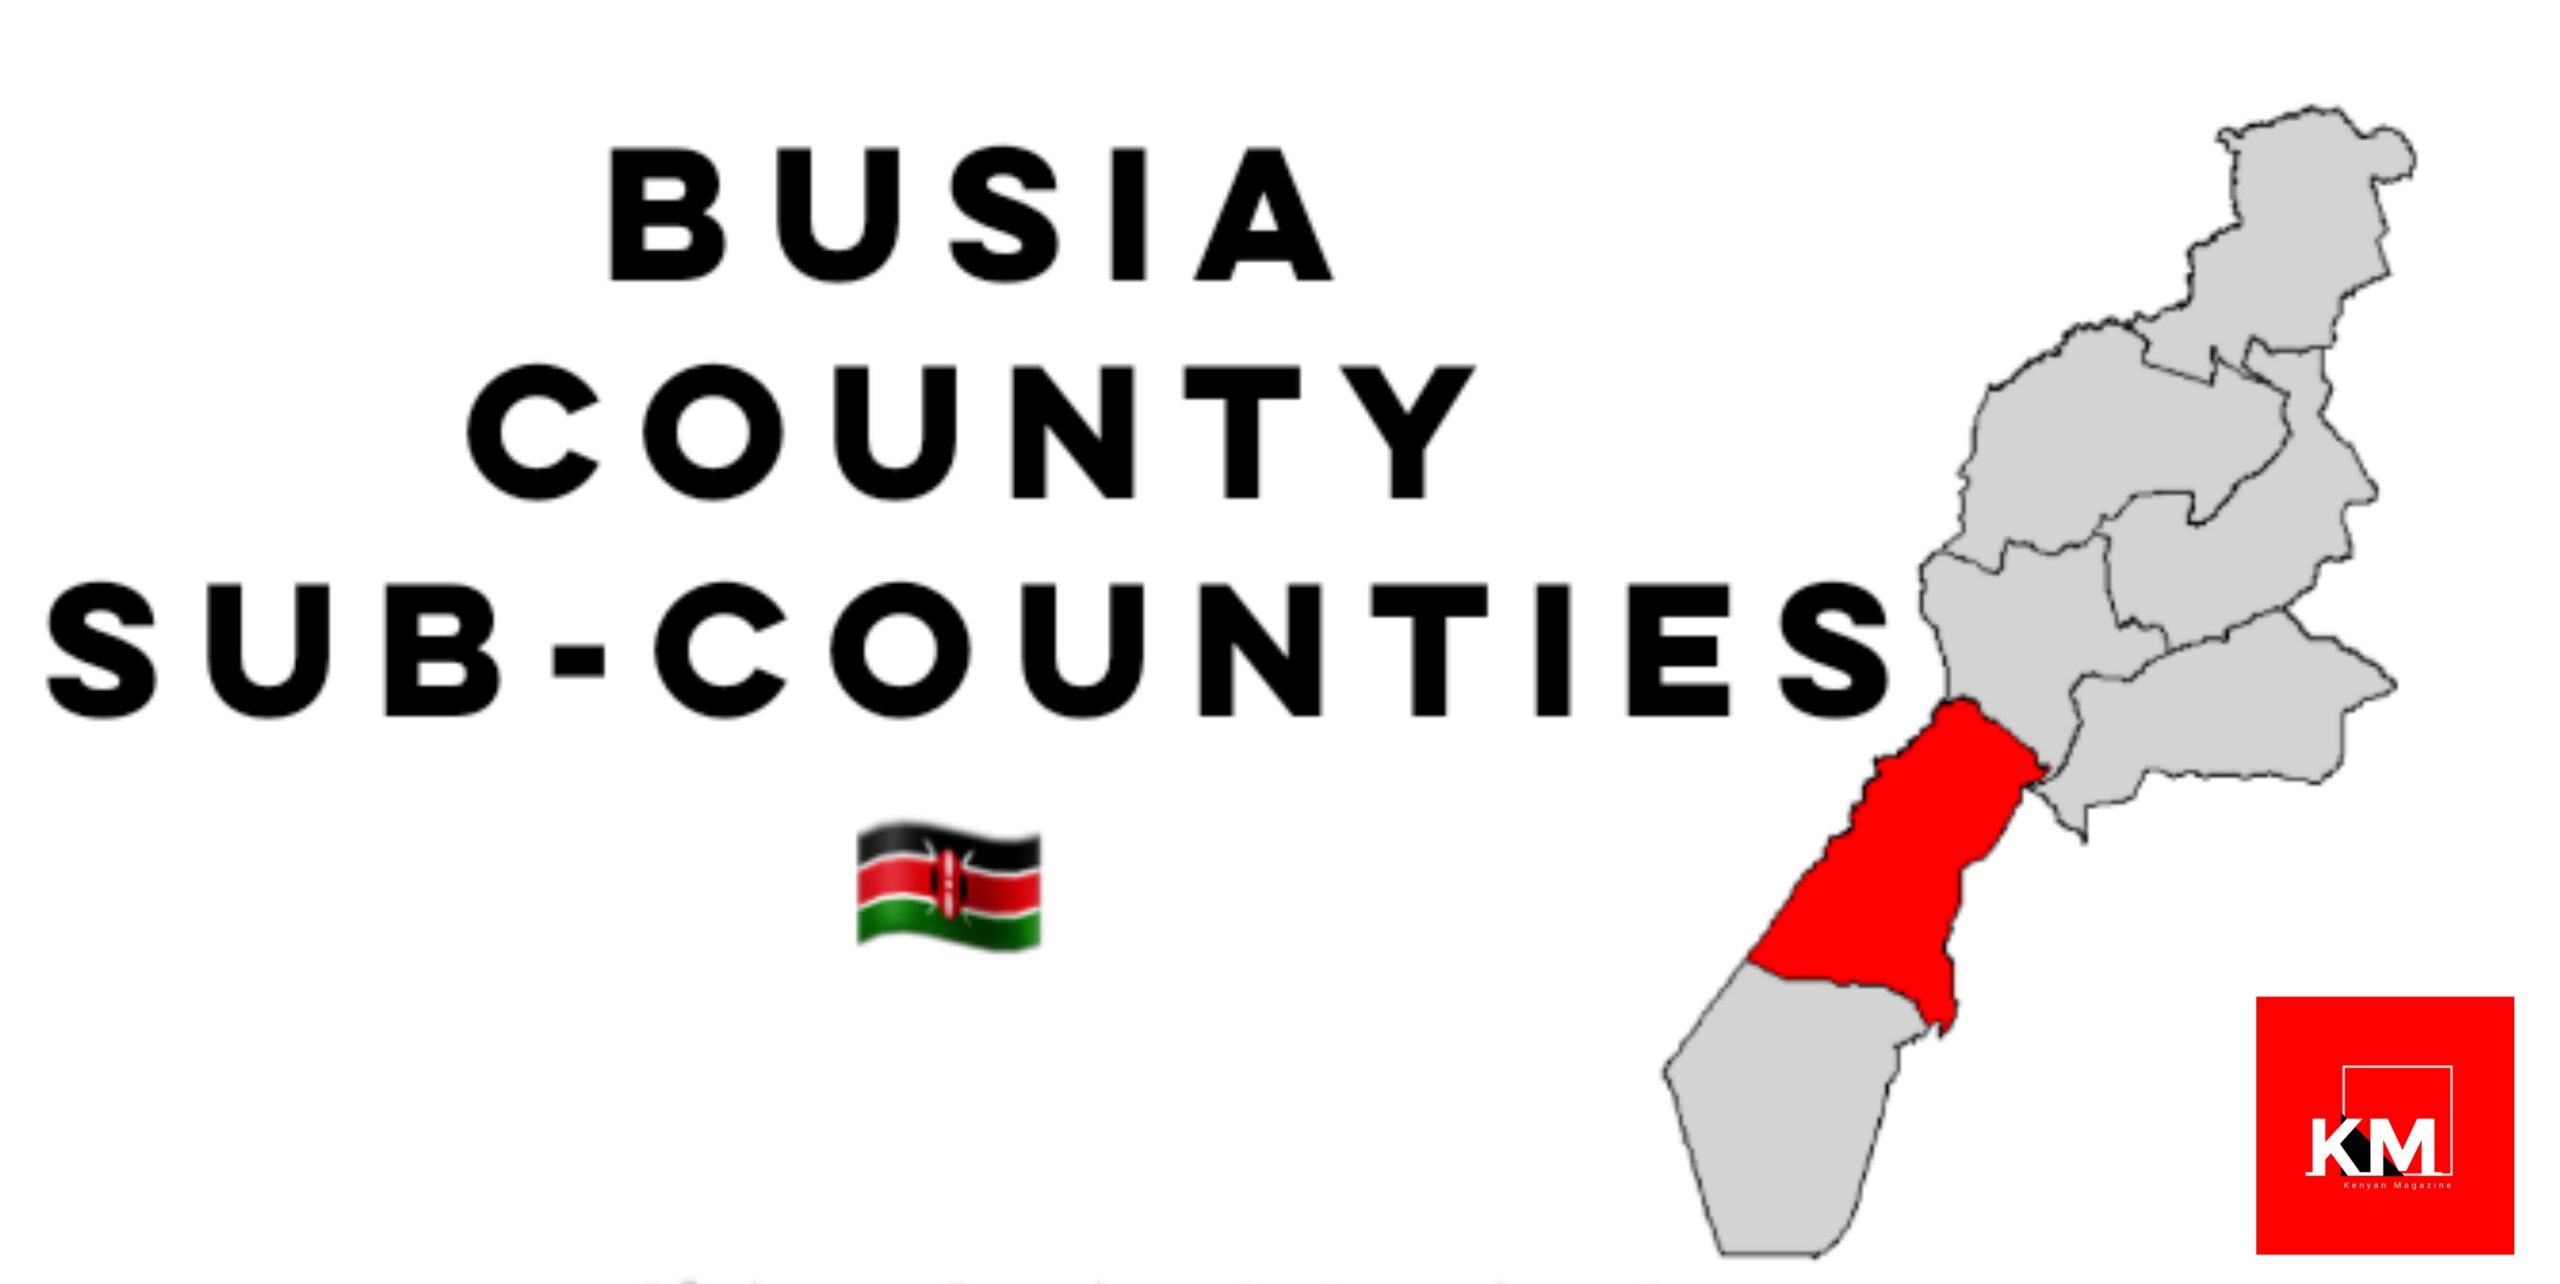 Busia County Sub-Counties